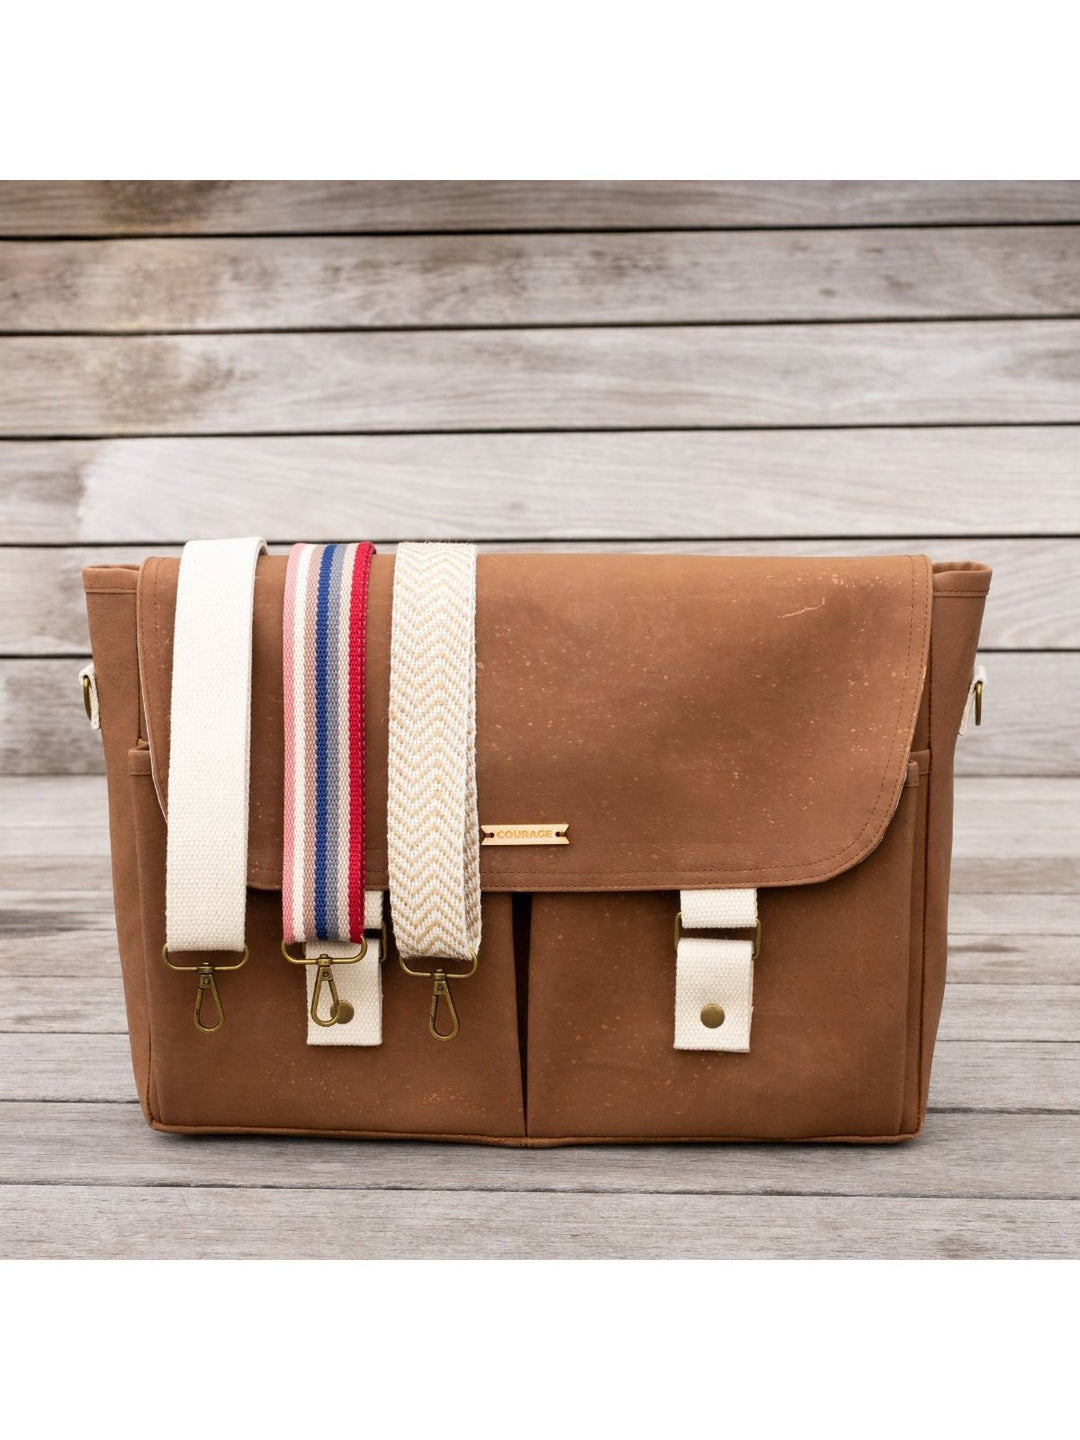 BagsNOMAD strap collection | SEPIACarry Courage